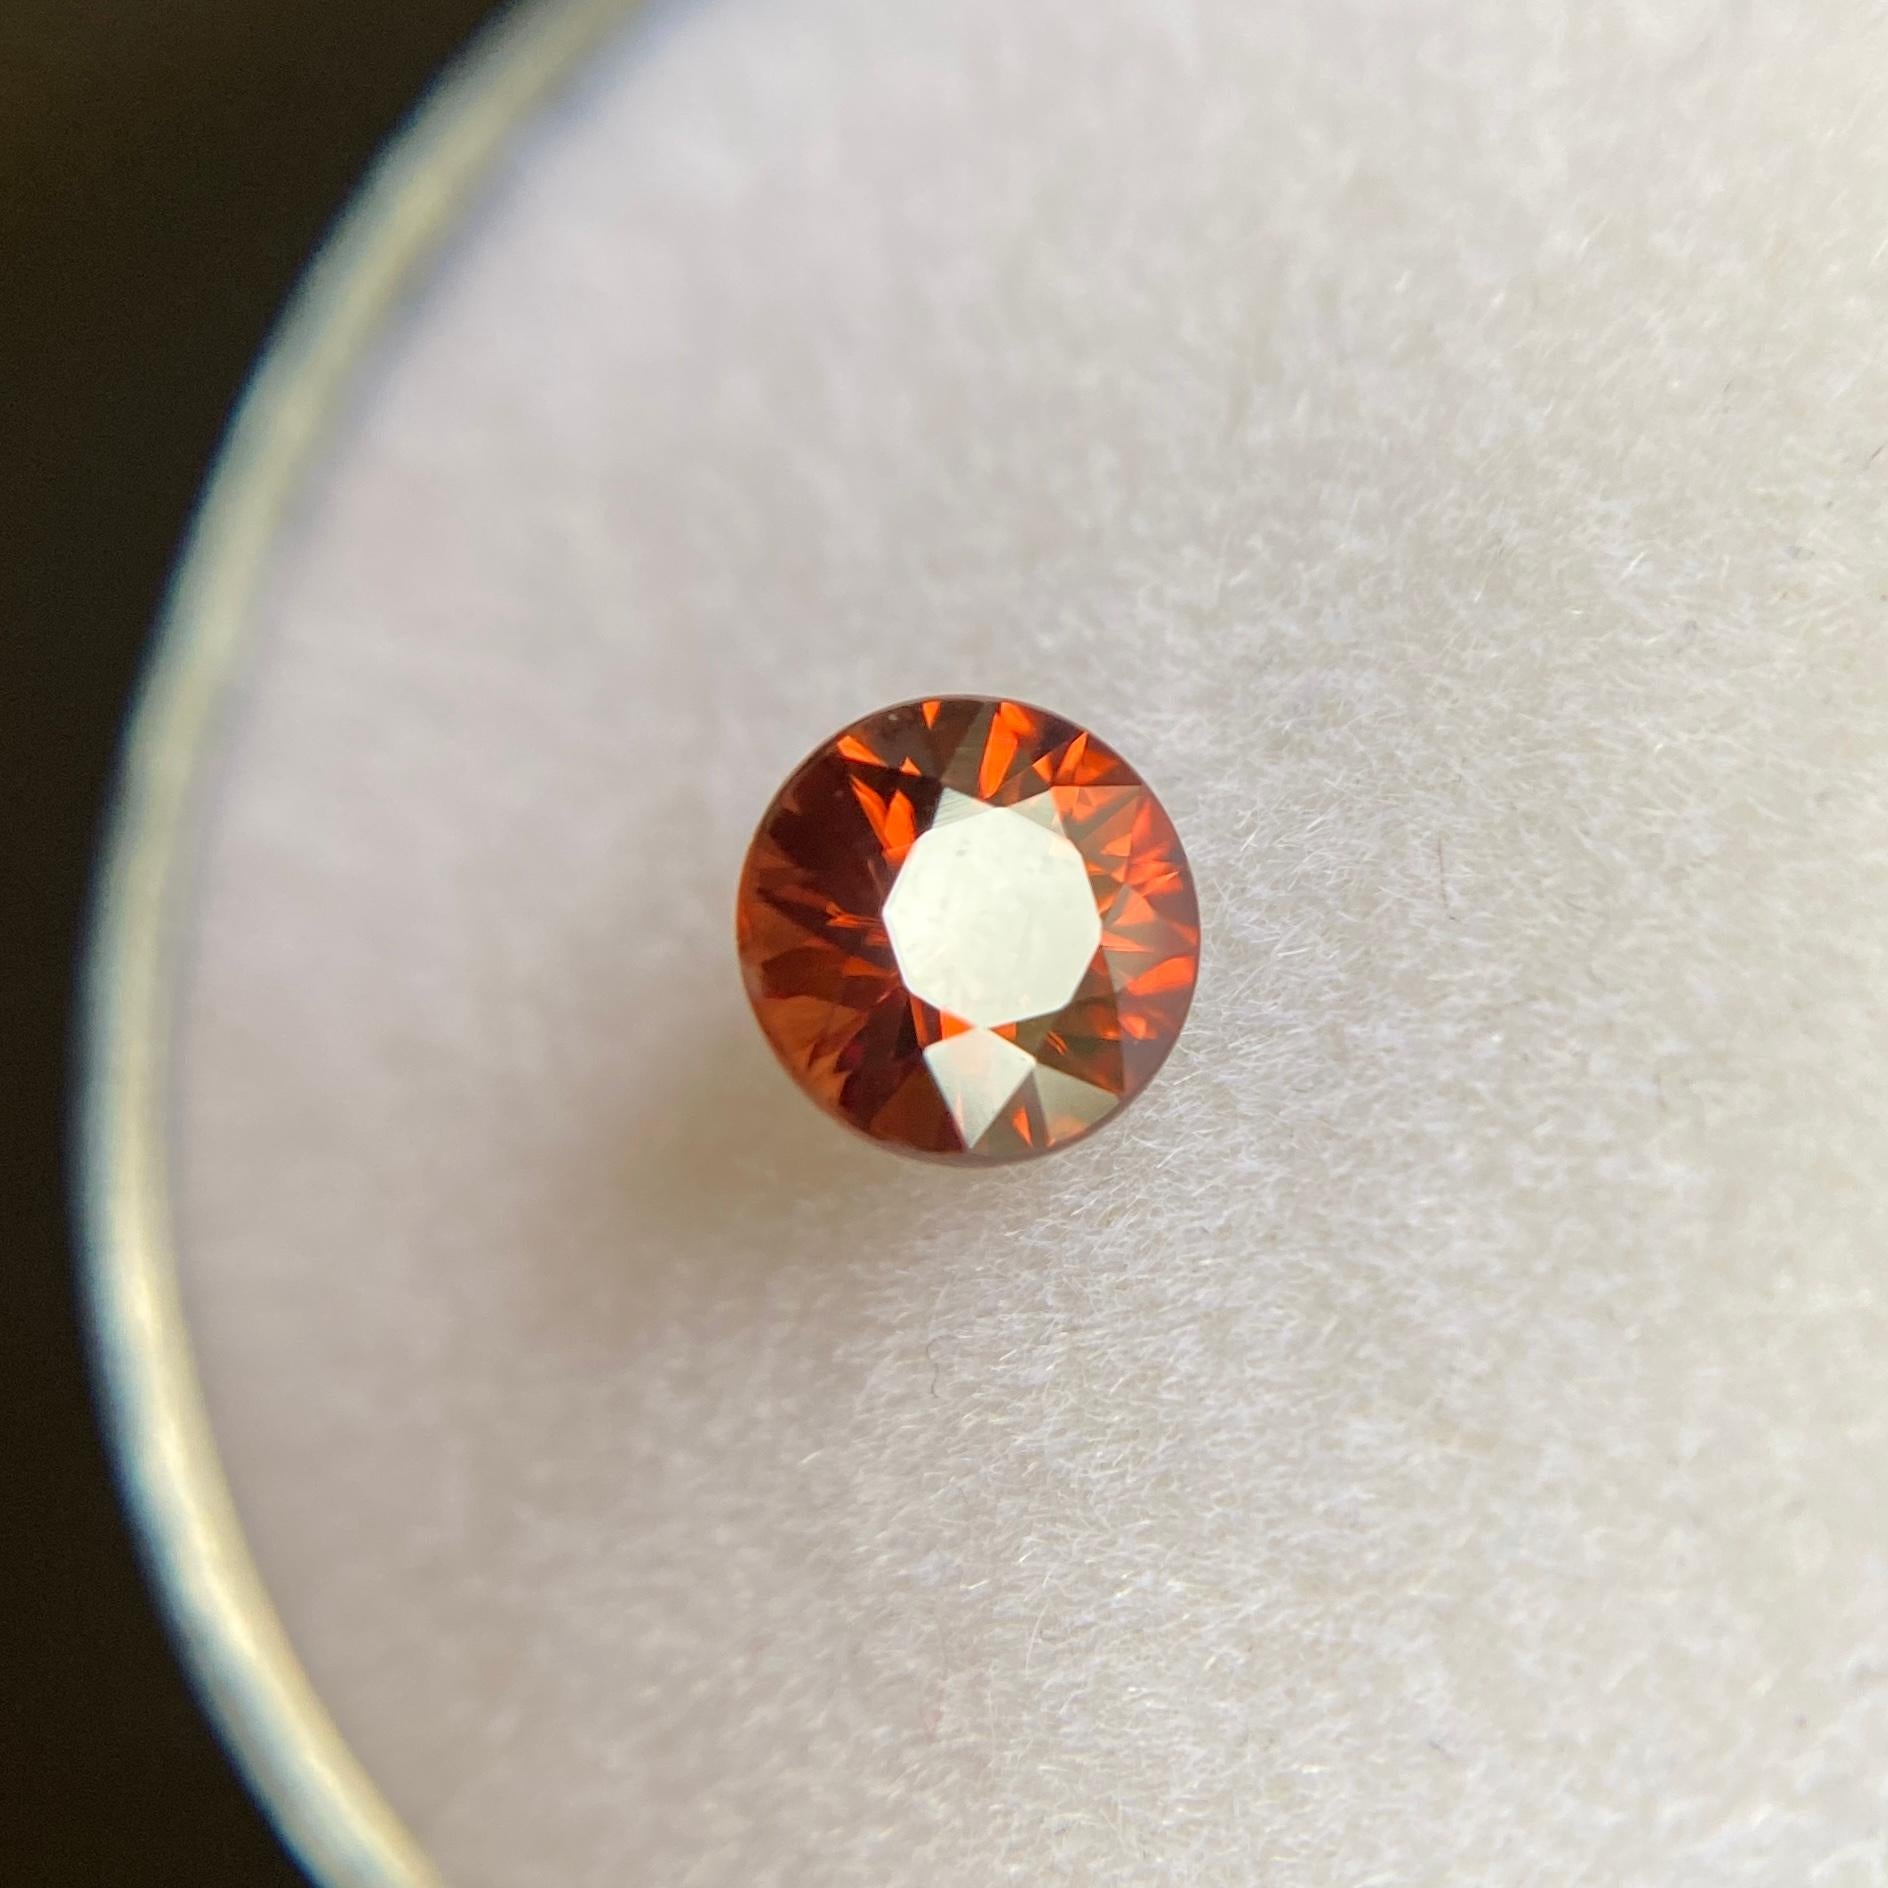 Fine Vivid Red Orange Zircon Gemstone.

0.71 Carat with a beautiful vivid red orange colour and excellent clarity. Very clean stone.

Also has an excellent round cut with good proportions and symmetry. Showing lots of brilliance, fire and light